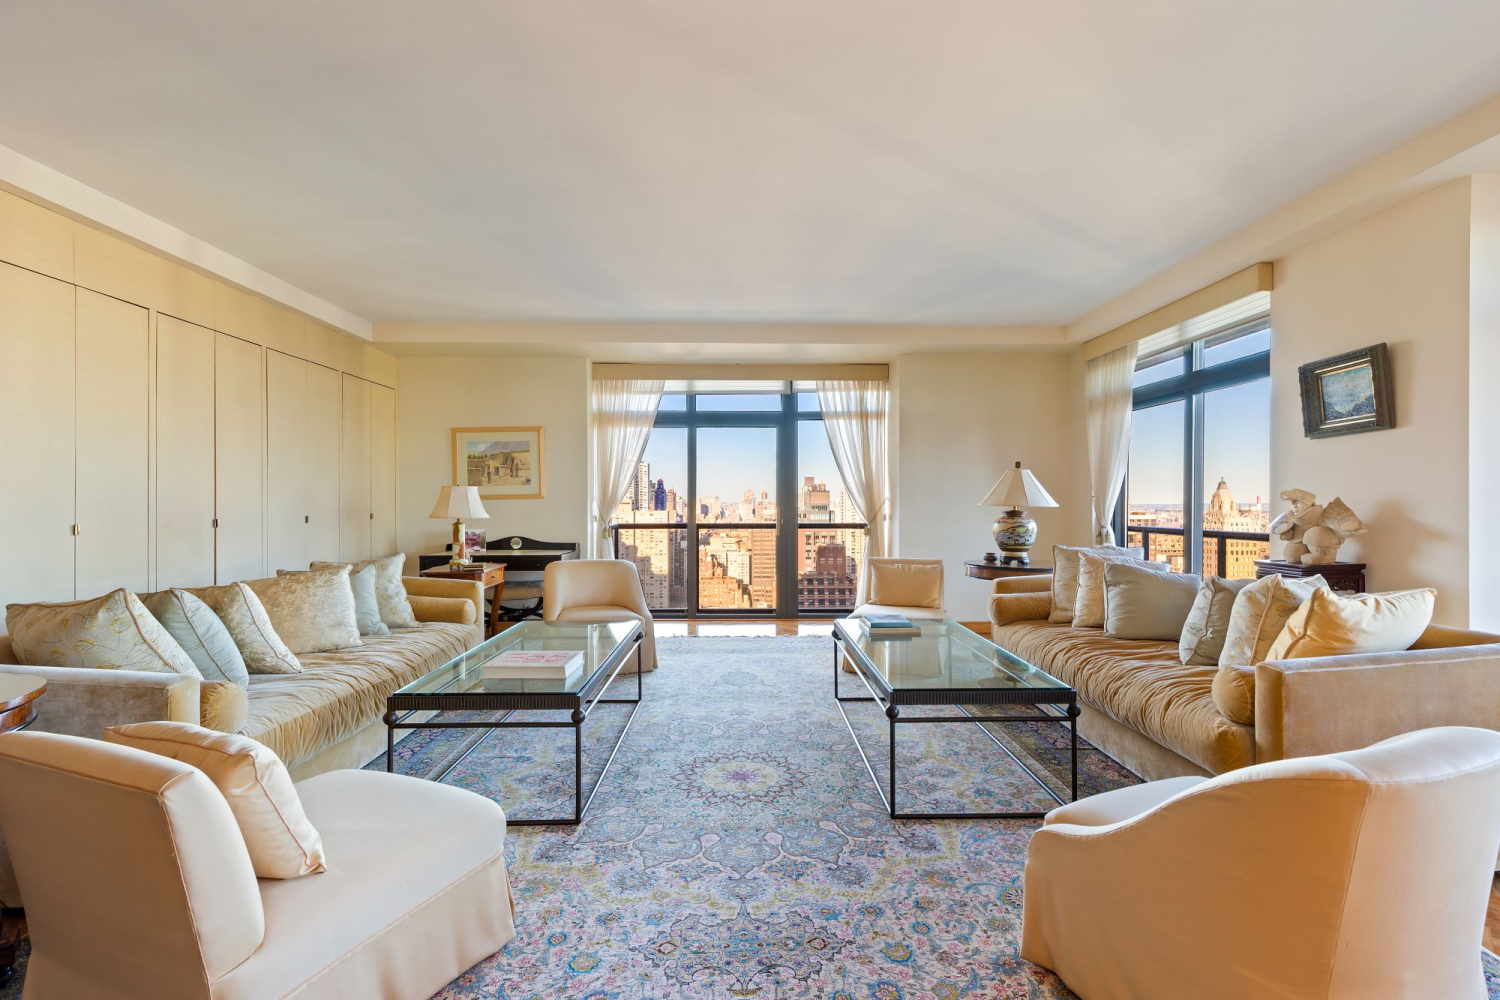 100 United Nations Plaza 38Ae, Turtle Bay, Midtown East, NYC - 4 Bedrooms  
3.5 Bathrooms  
7 Rooms - 